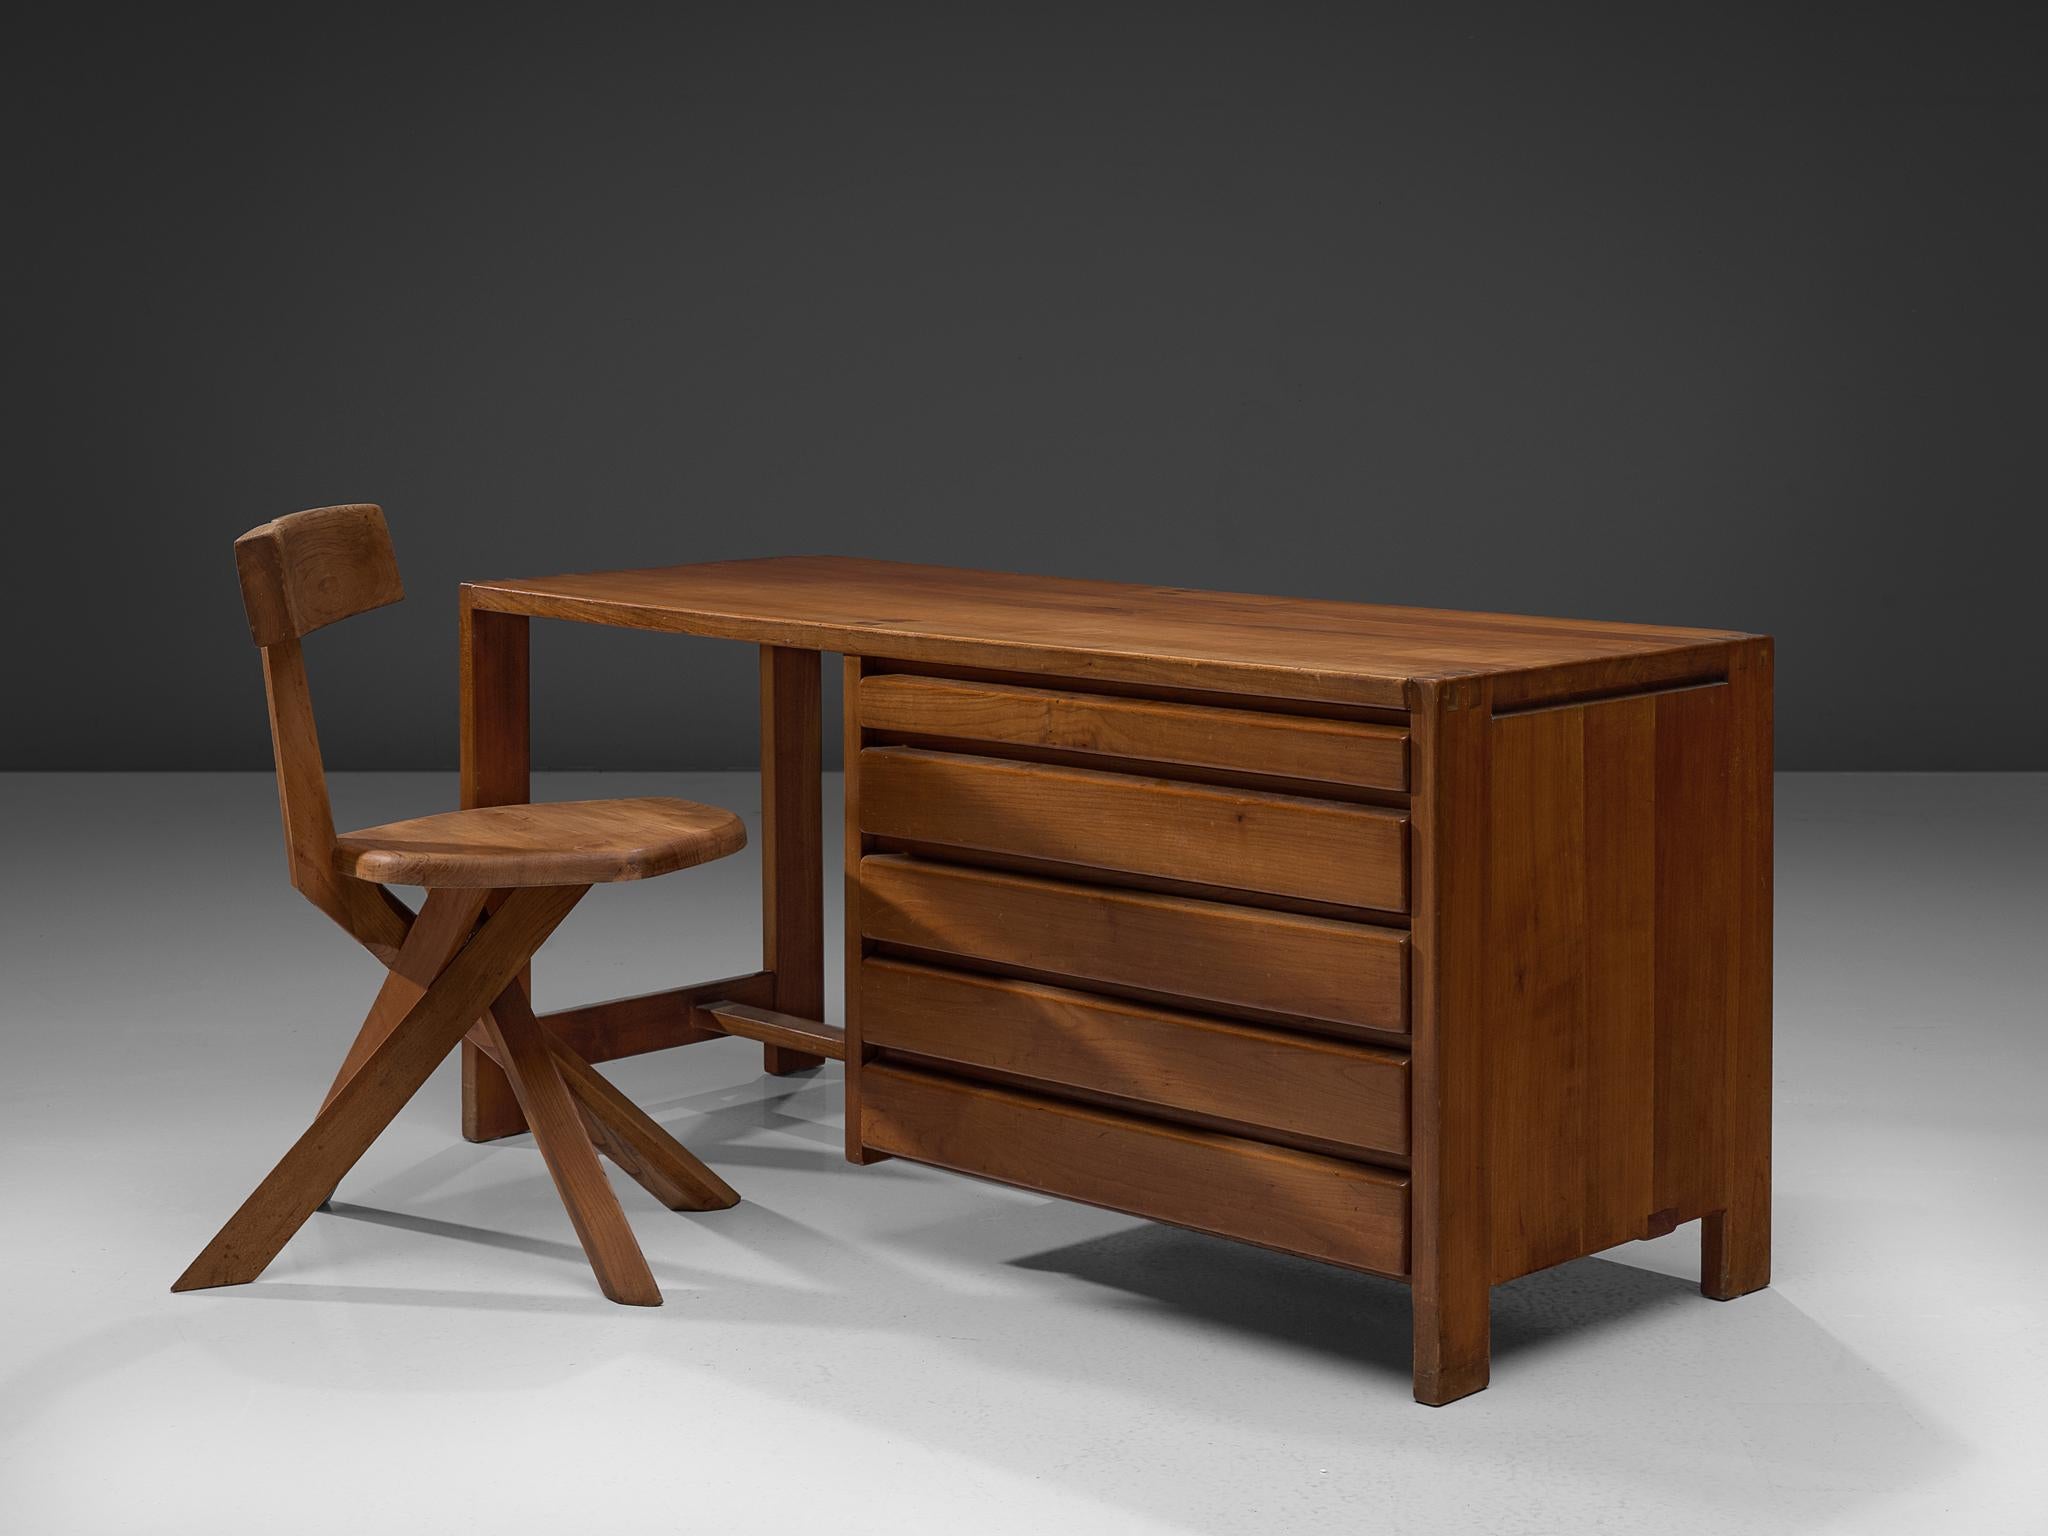 Pierre Chapo, dressing table R05, elm, circa 1960

This exquisitely crafted table with drawers combines a simplified yet complex design combined with nifty, solid construction details that characterize Chapo's work. The dressing table has seven